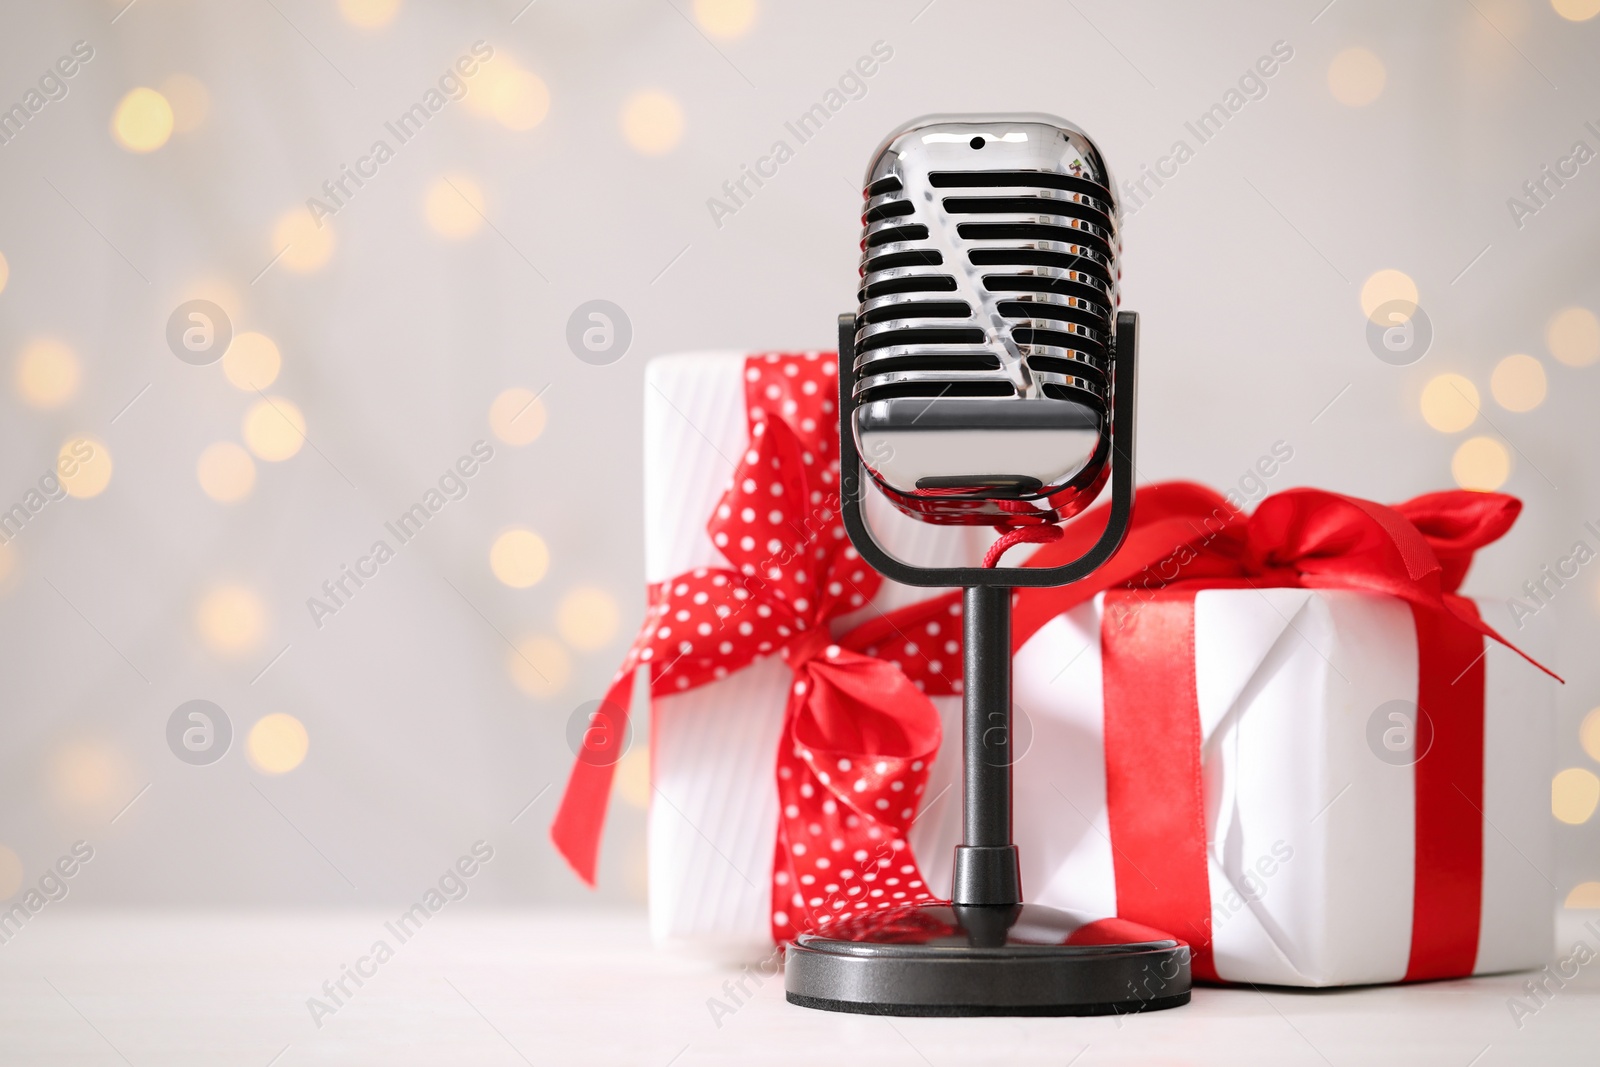 Photo of Retro microphone and gift boxes on table against blurred lights, space for text. Christmas music